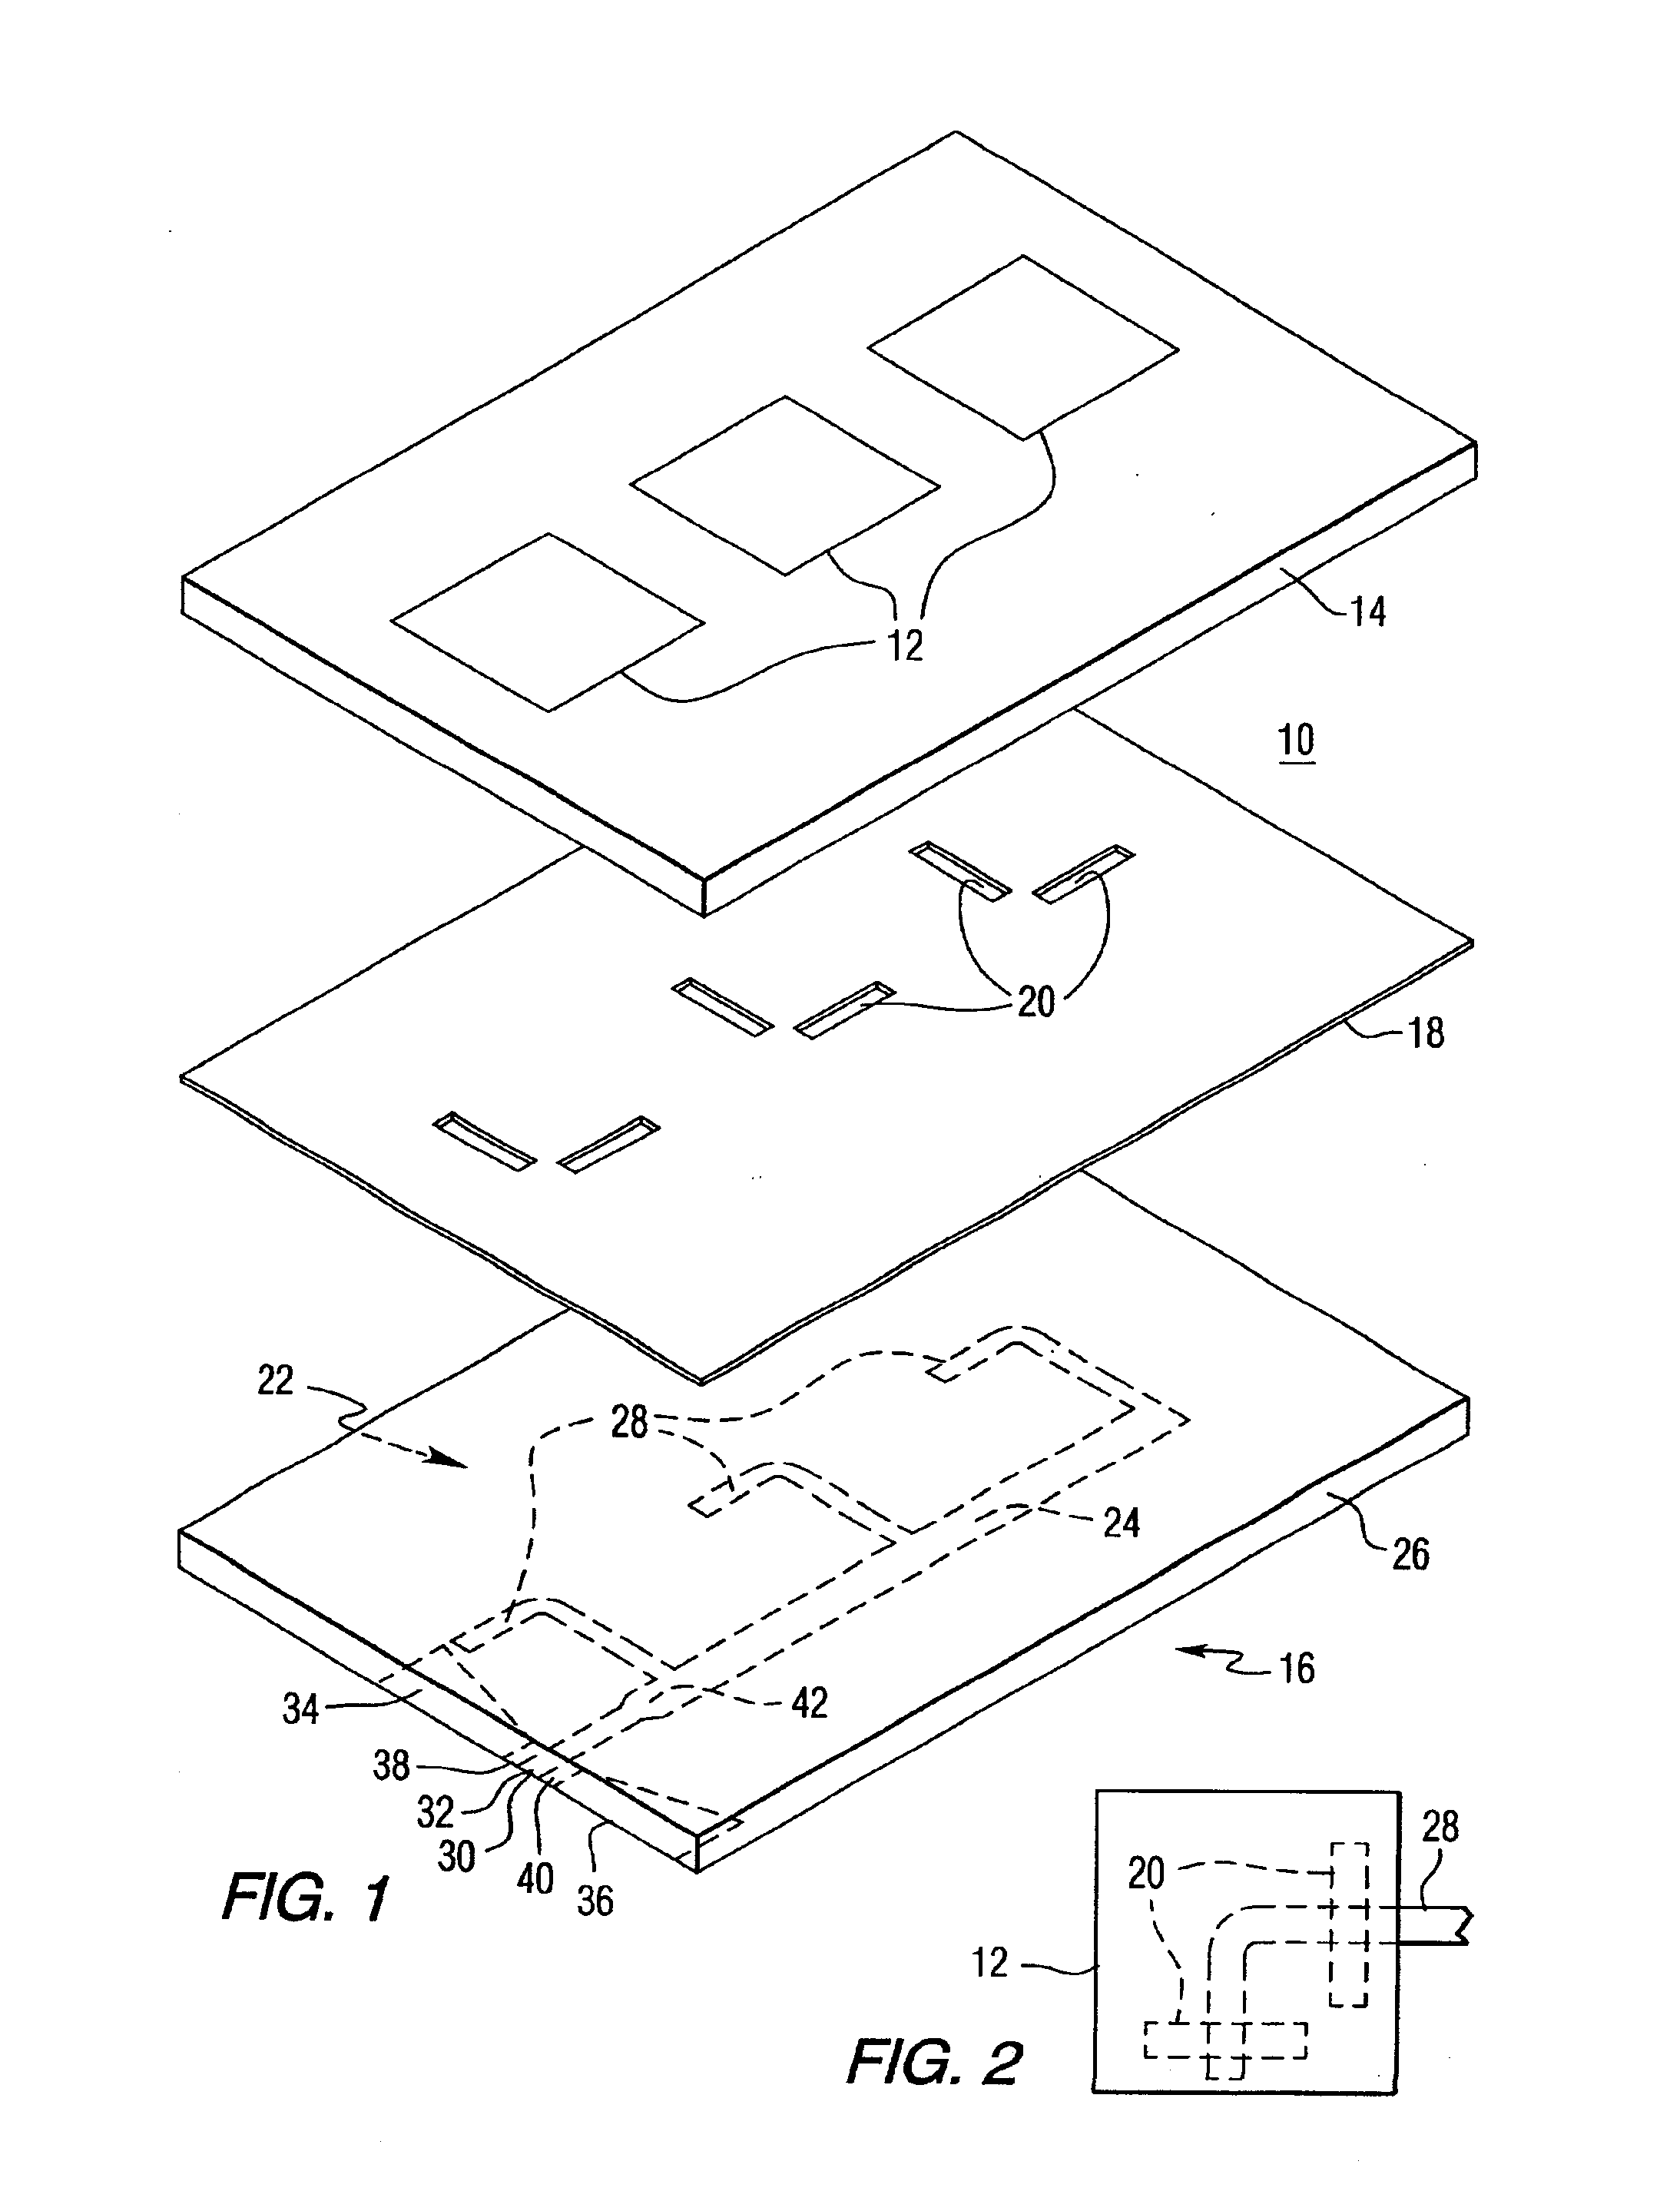 Serially-fed phased array antennas with dielectric phase shifters